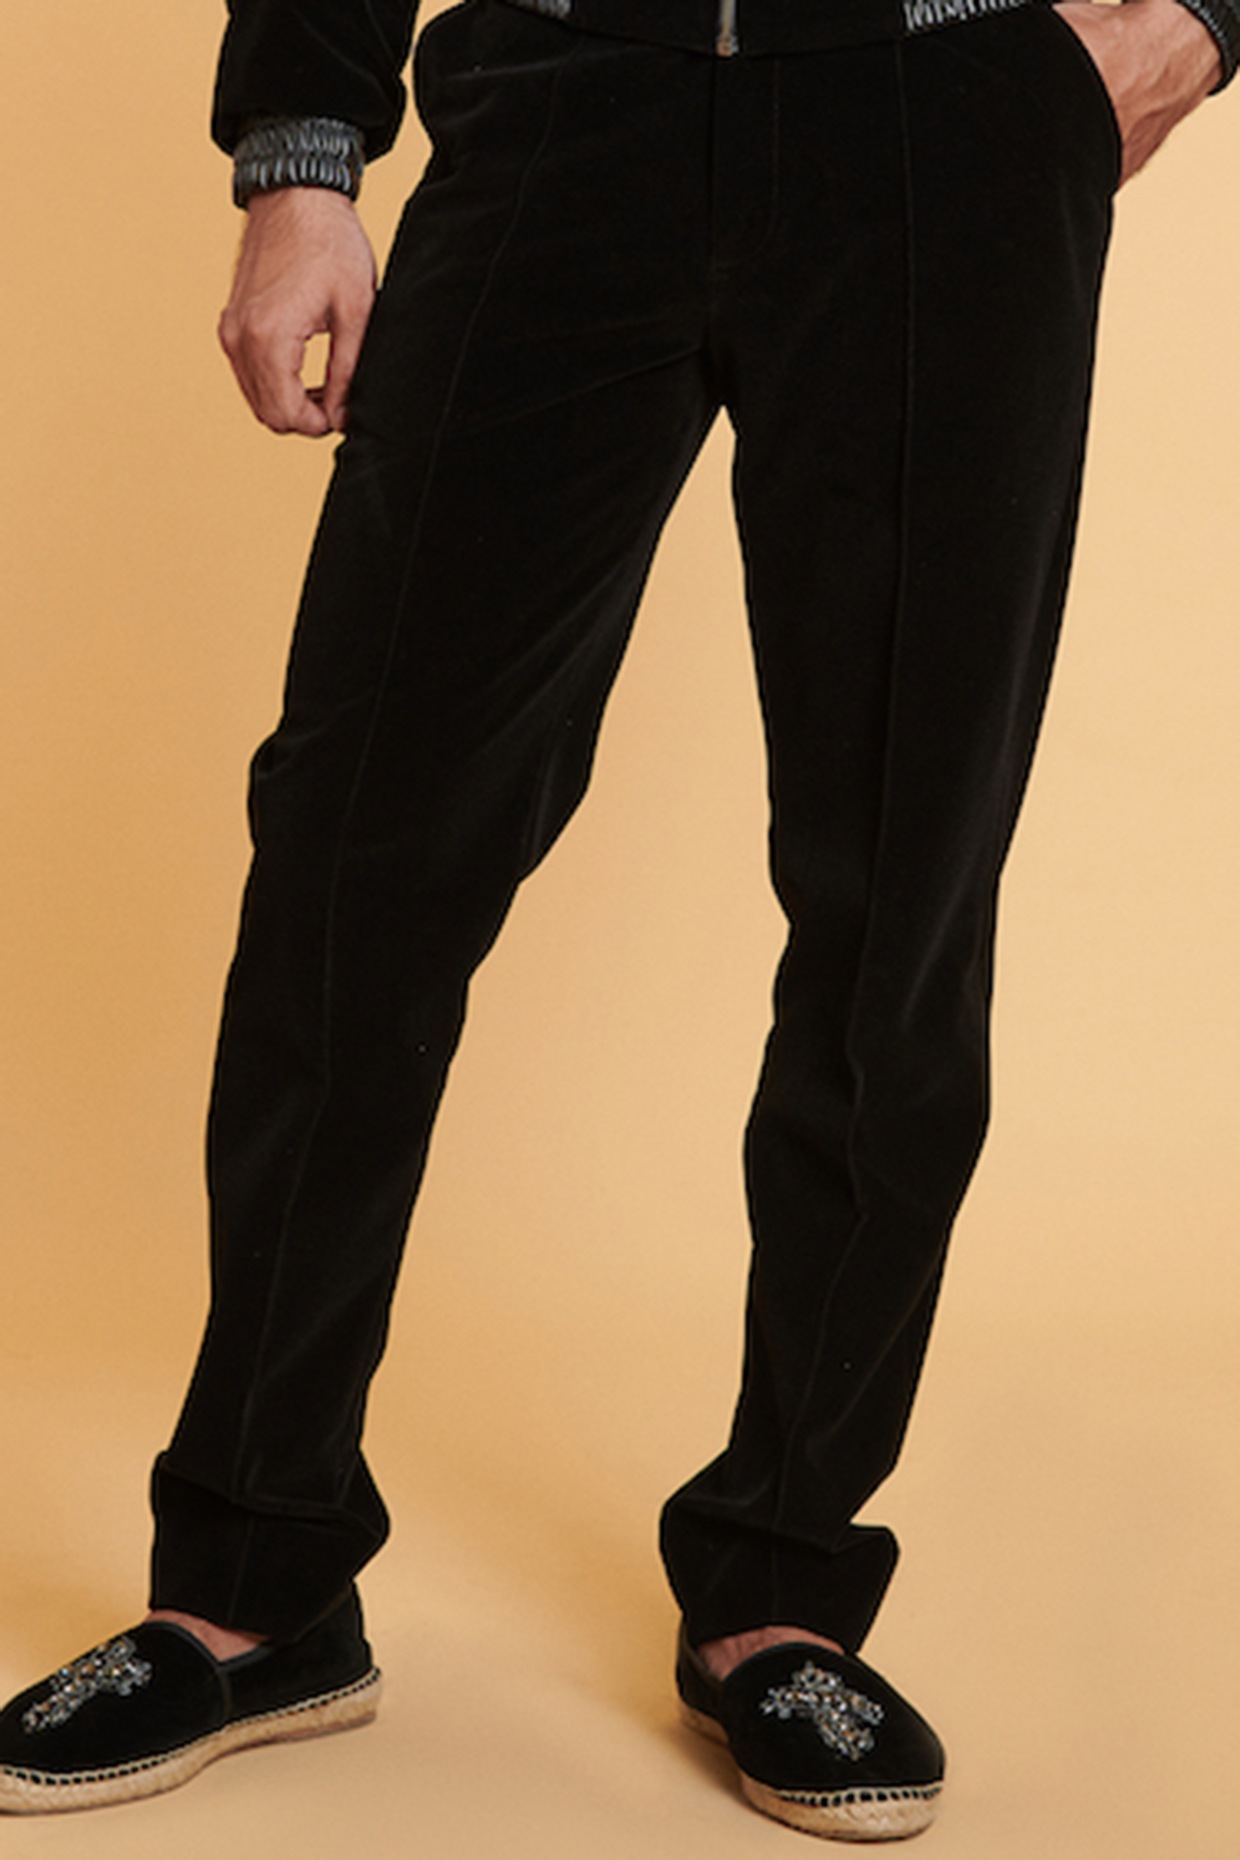 Black Cargo Pants For Men Men's Mid-waist Zip Cargo Pants Relaxed Fit Solid  Cargo Trousers With Multi-pocket - Walmart.com